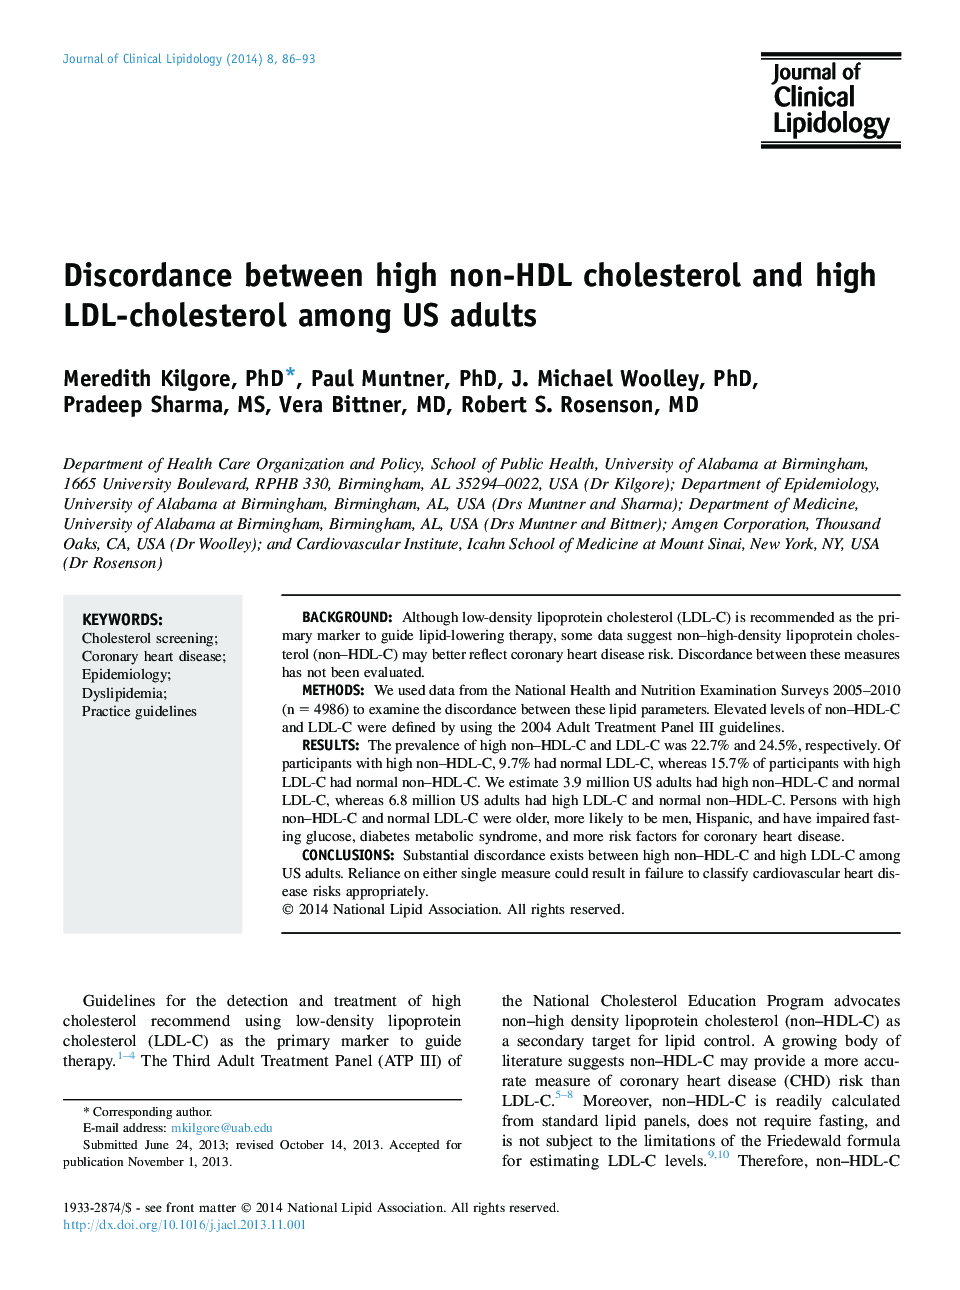 Discordance between high non-HDL cholesterol and high LDL-cholesterol among US adults